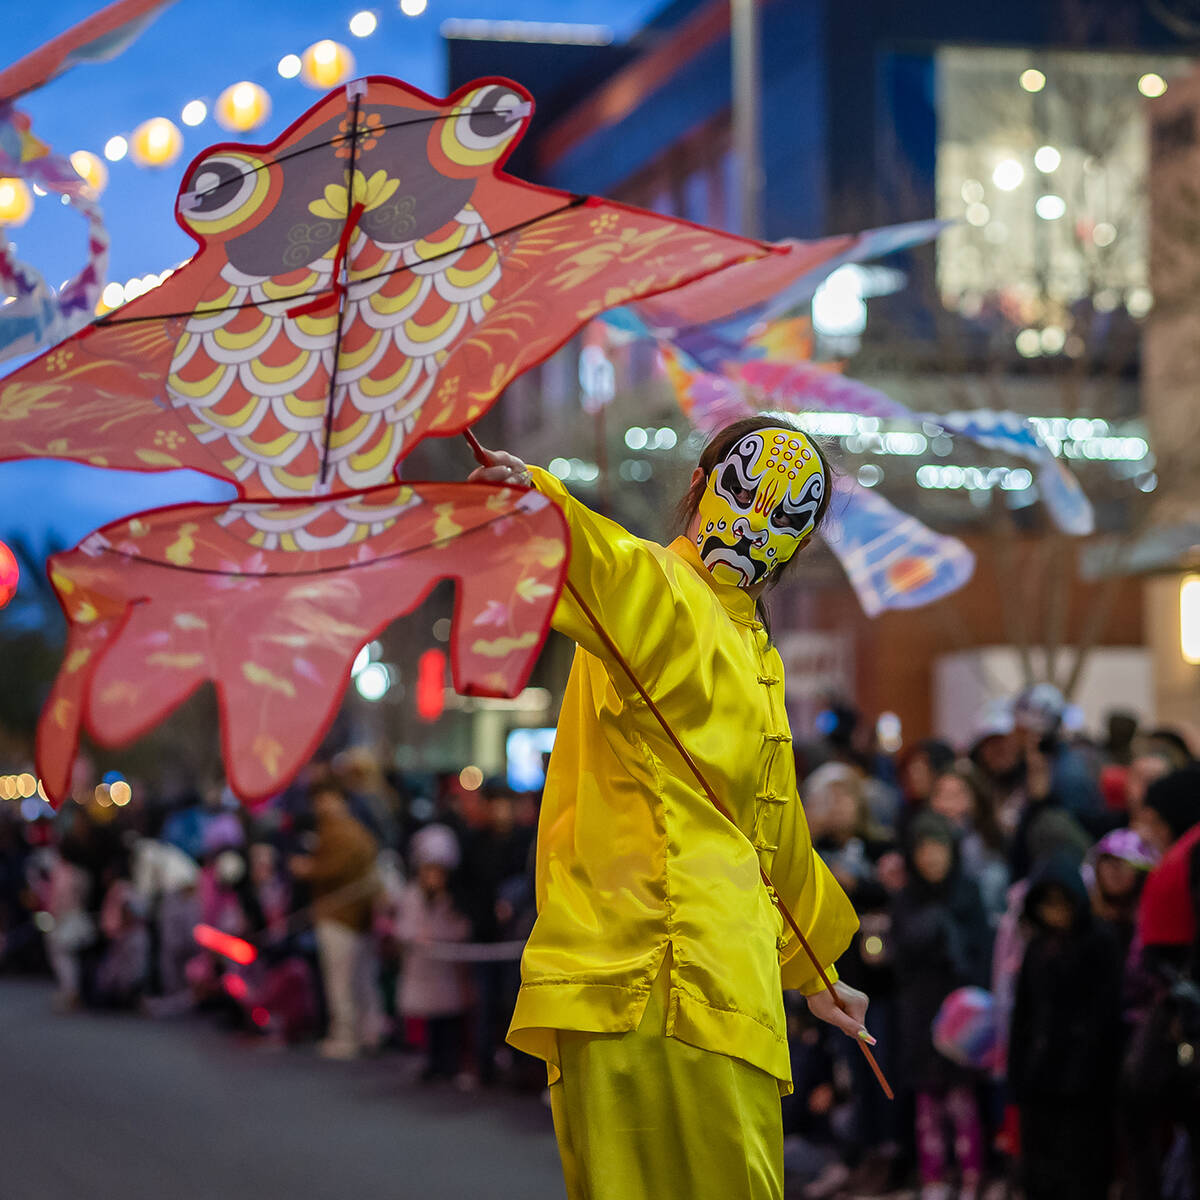 Downtown Summerlin Downtown Summerlin will host its seventh annual Lunar New Year Parade on Fe ...